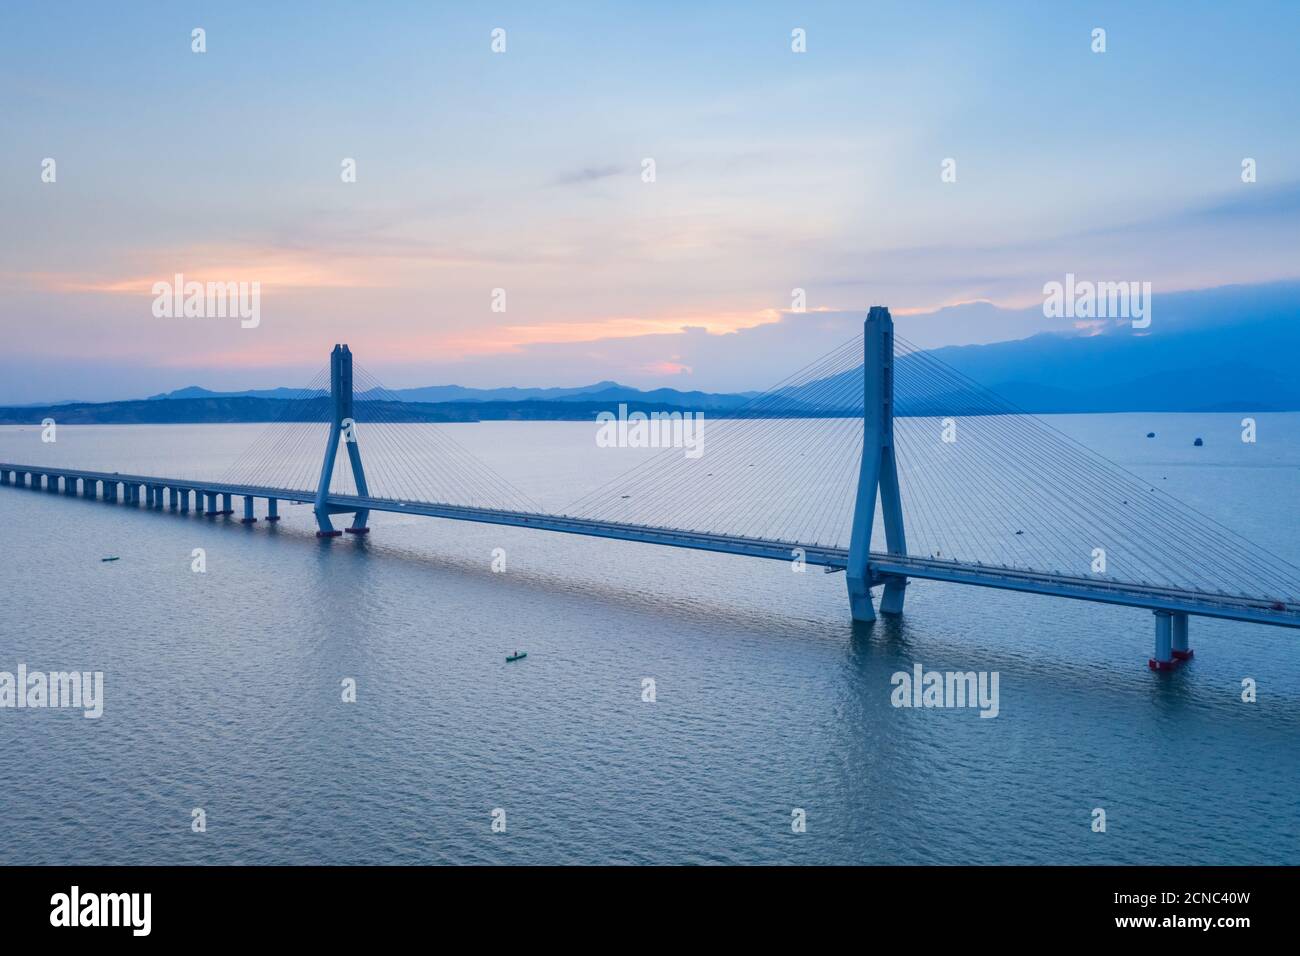 aerial view of cable-stayed bridge at dusk Stock Photo